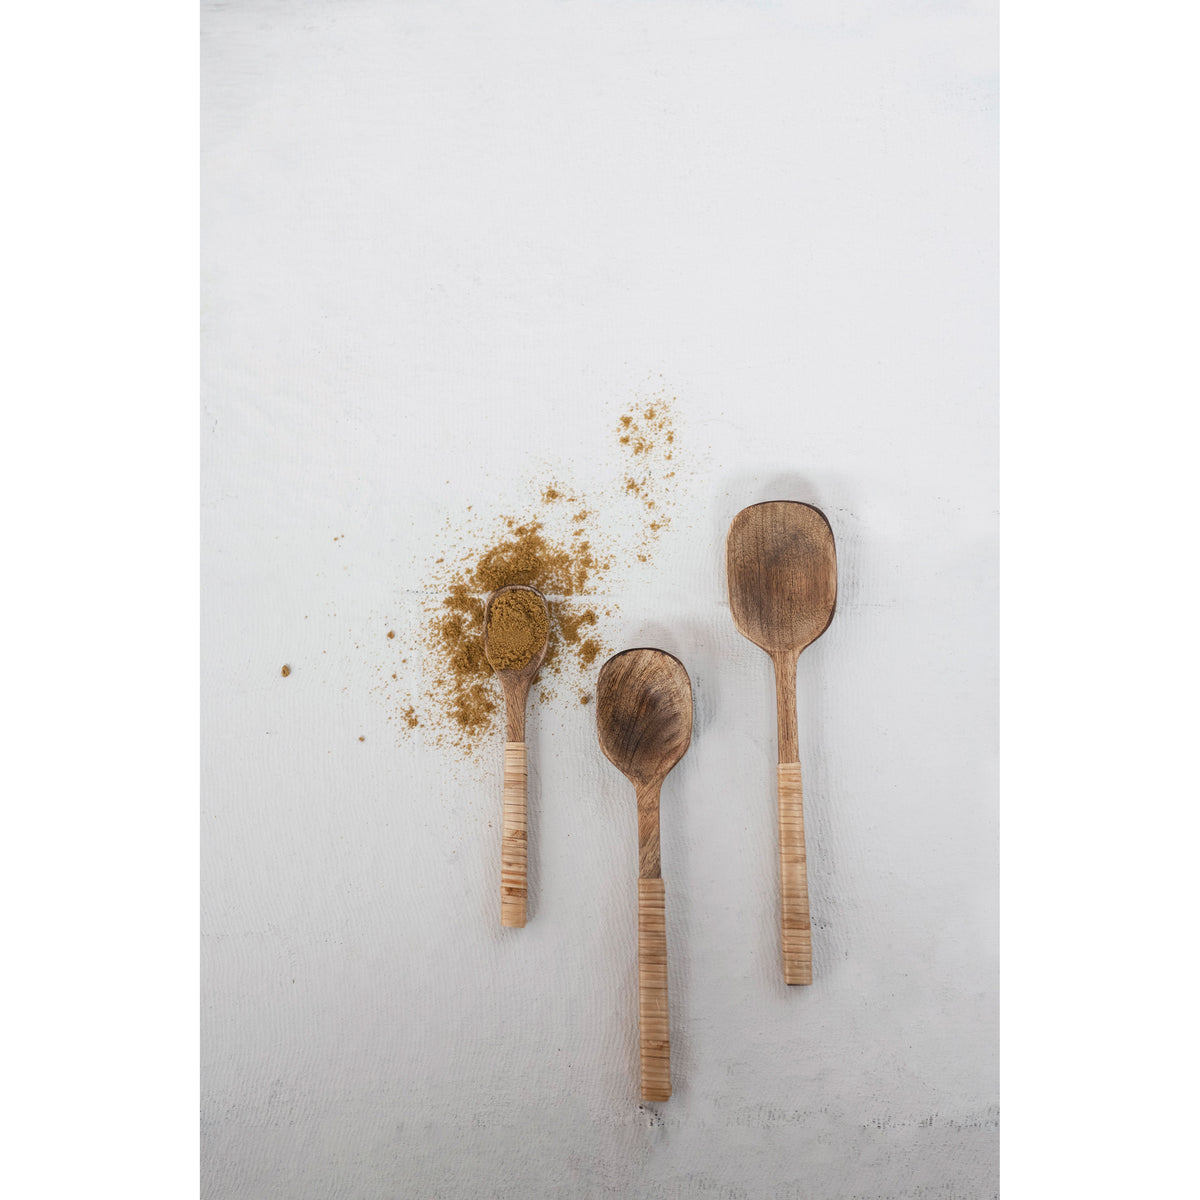 Mango Wood Spoons with Bamboo Wrapped Handles, Set of 3 in Printed Drawstring Bag